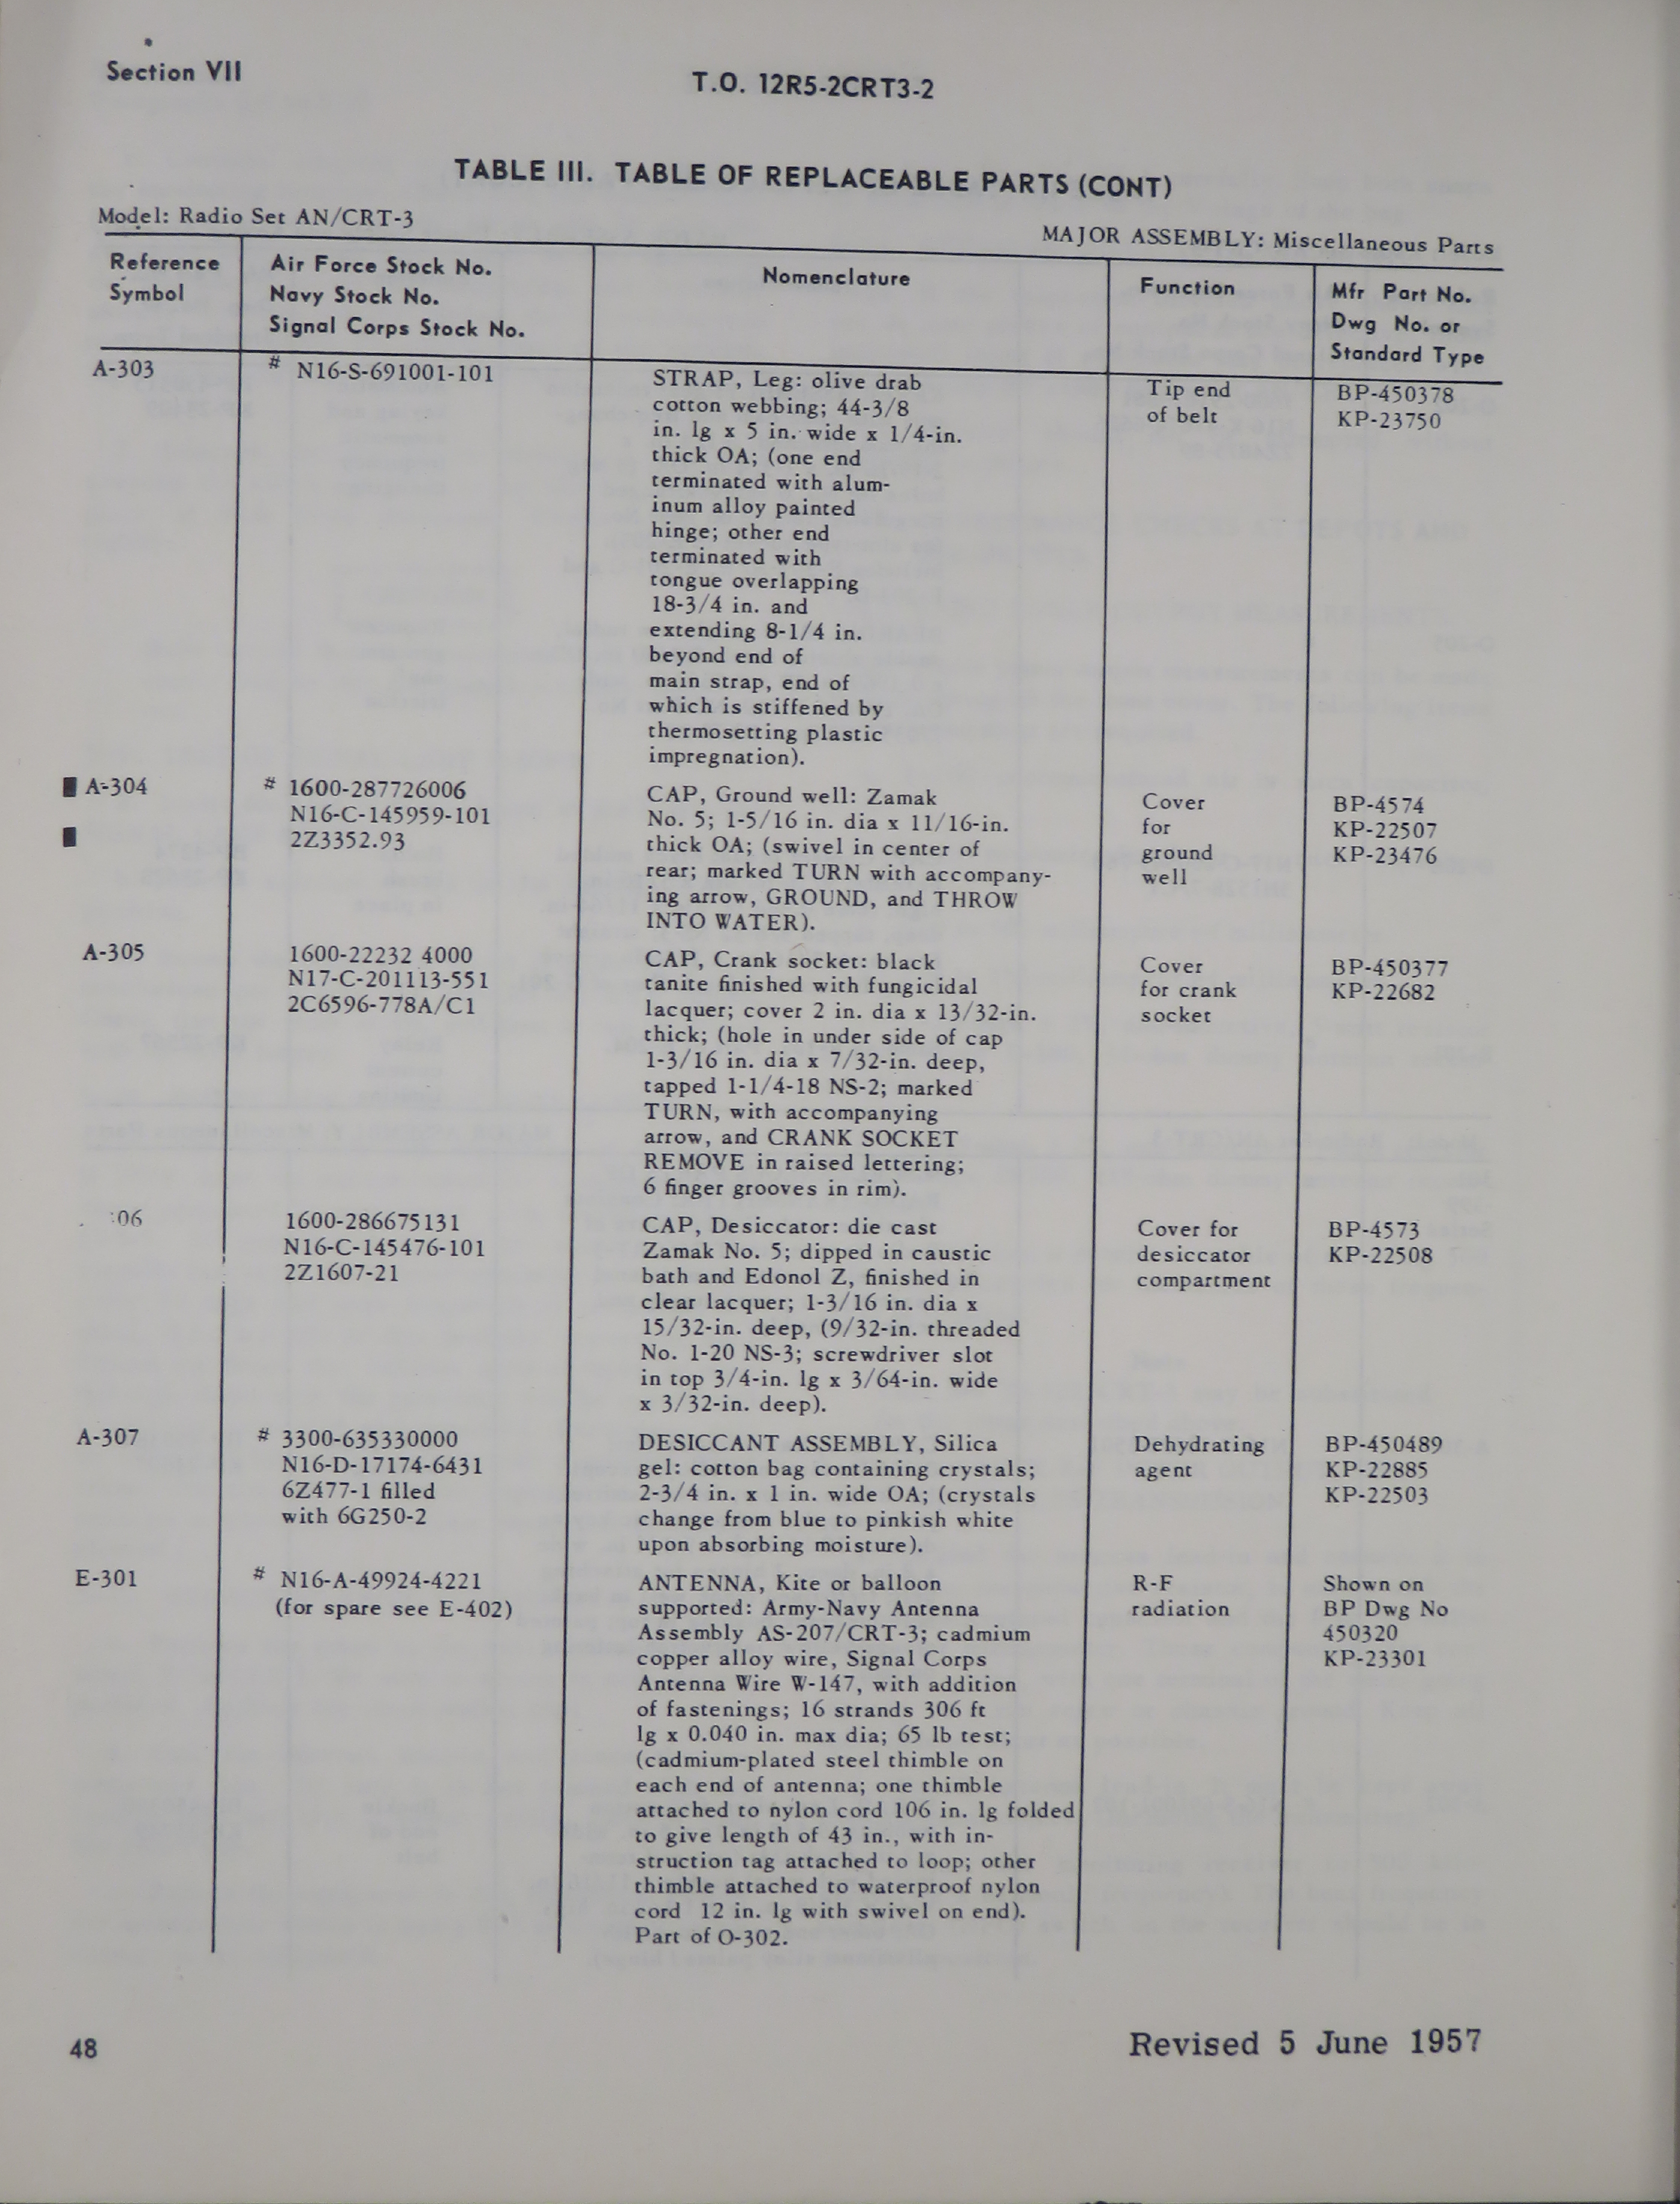 Sample page 6 from AirCorps Library document: Maintenance Instructions for Radio Set AN/CRT-3